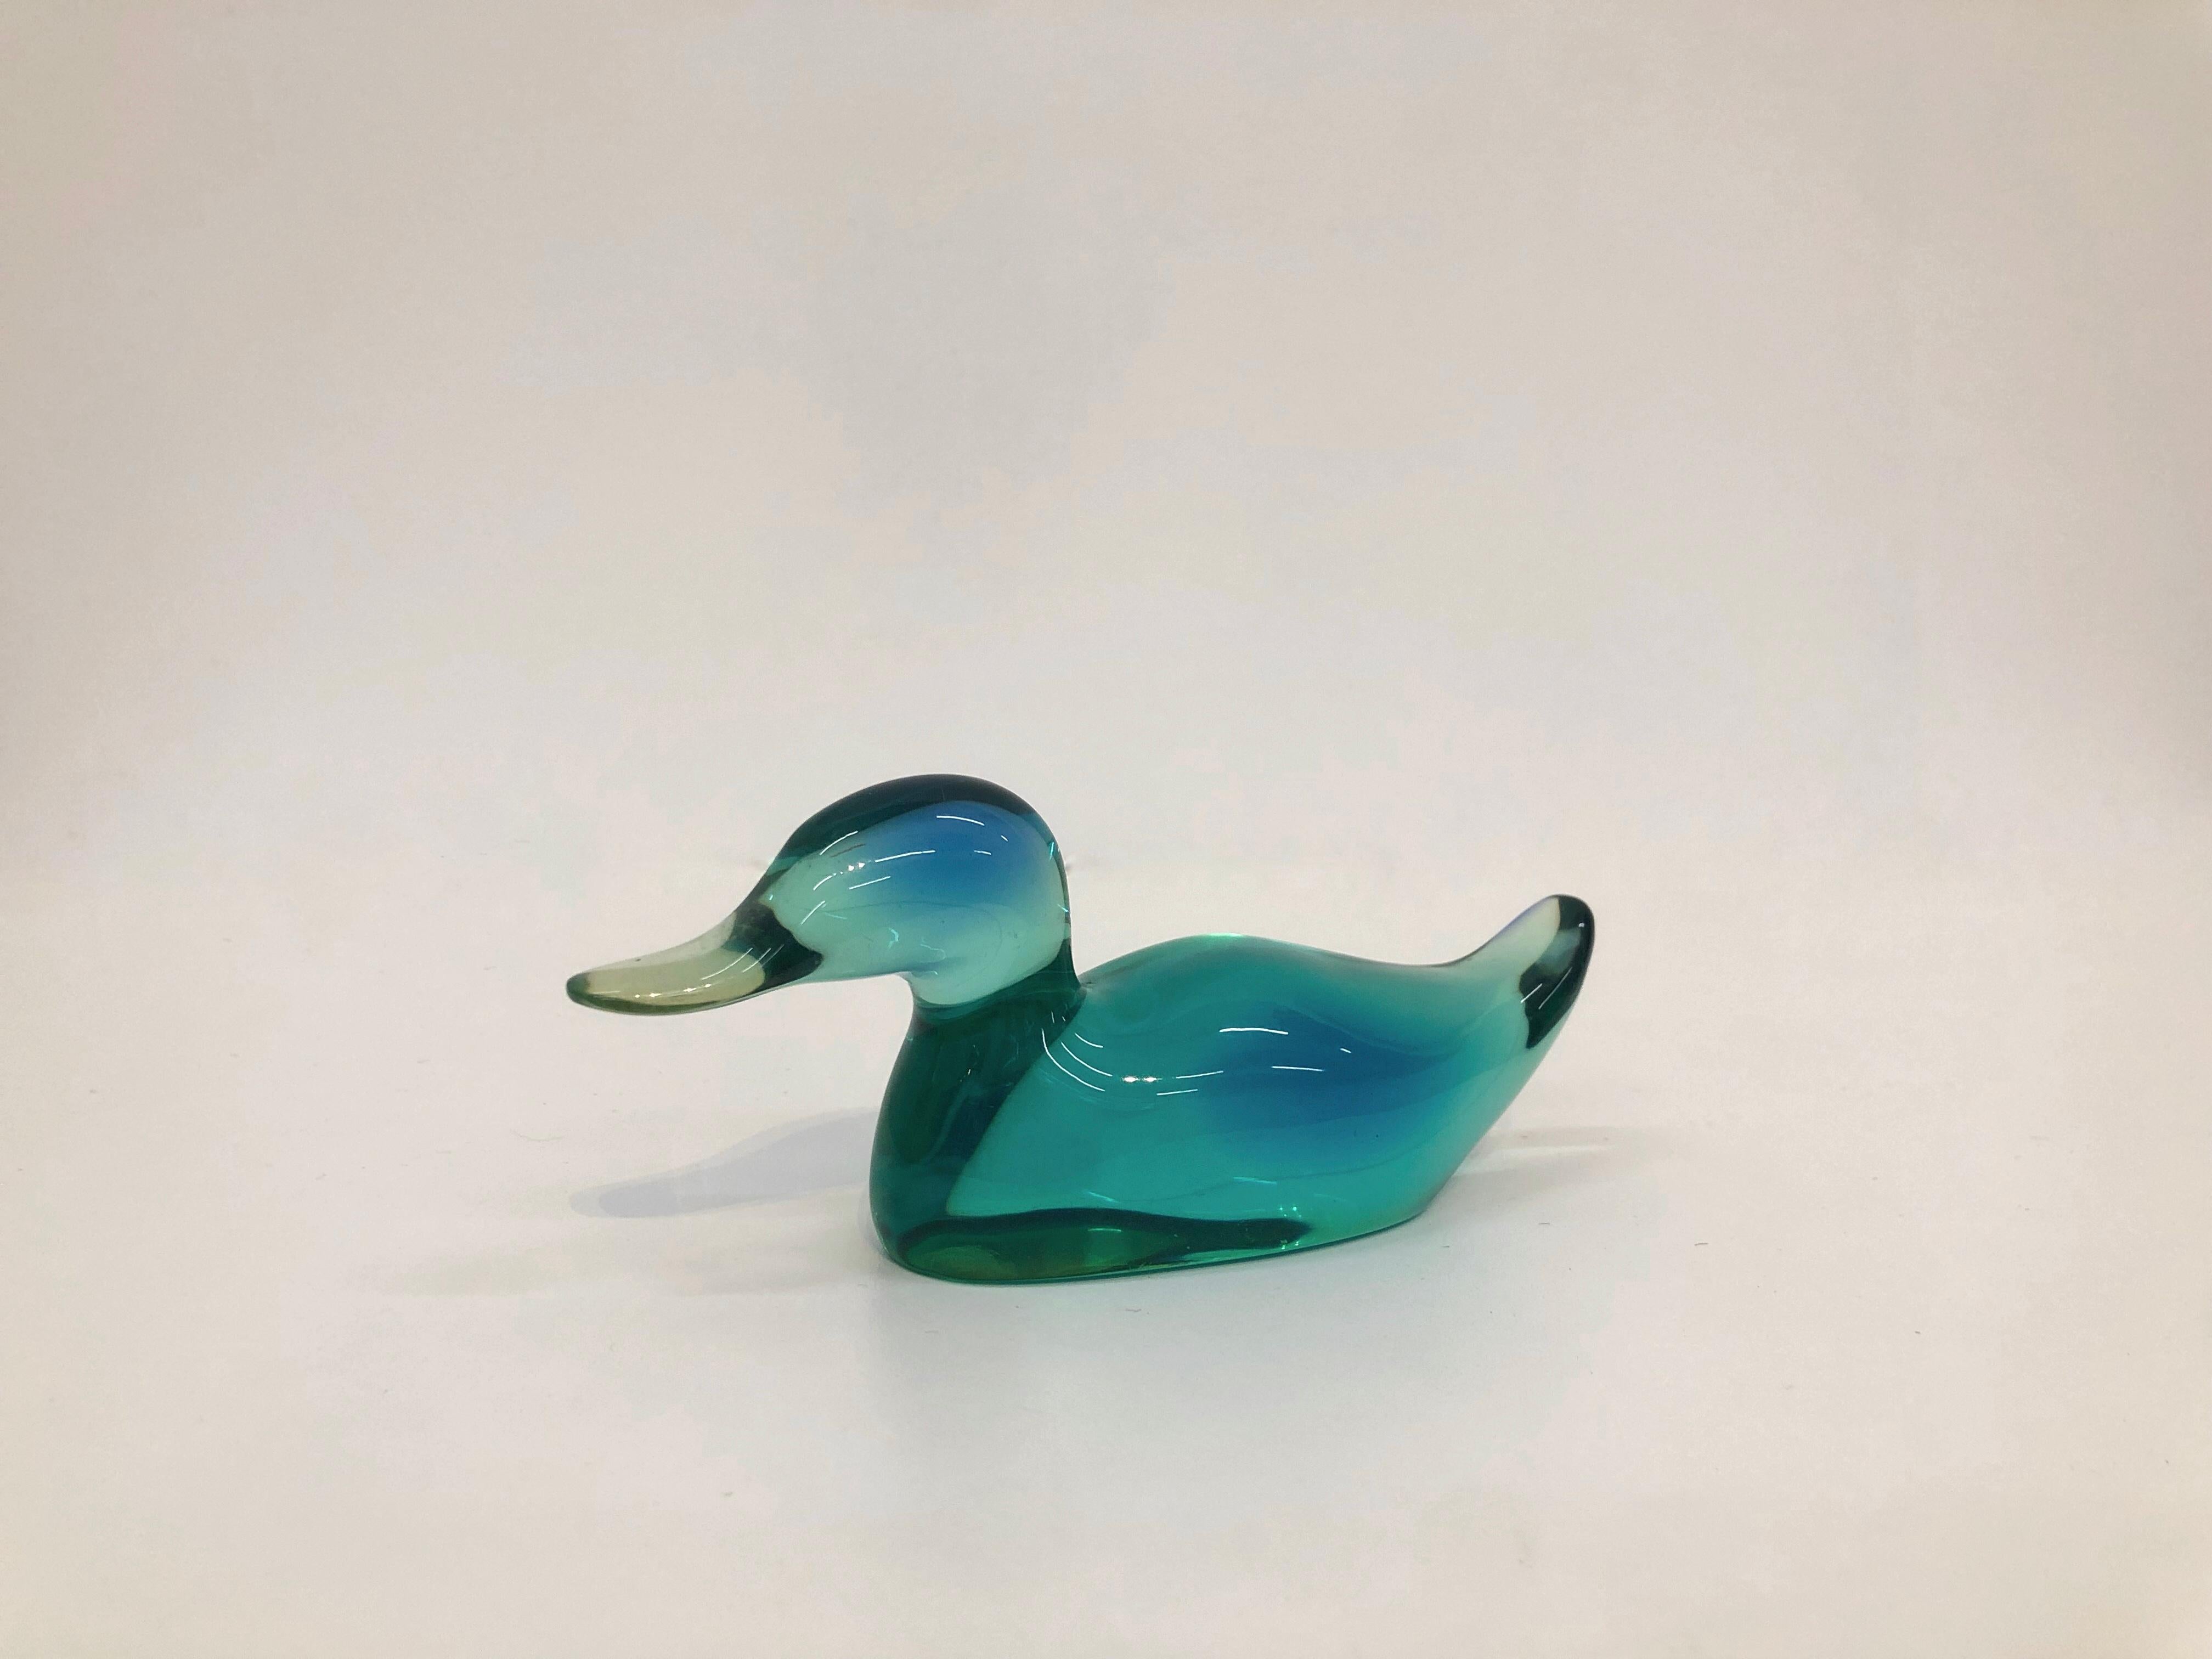 Brazilian midcentury blue lucite sculpture in the shape of a duck designed by Abraham Palatnik and manufactured by Silon in Rio de Janeiro, that produced large-scale design objects from the 1970s to the 2000s. This piece still keeps the original